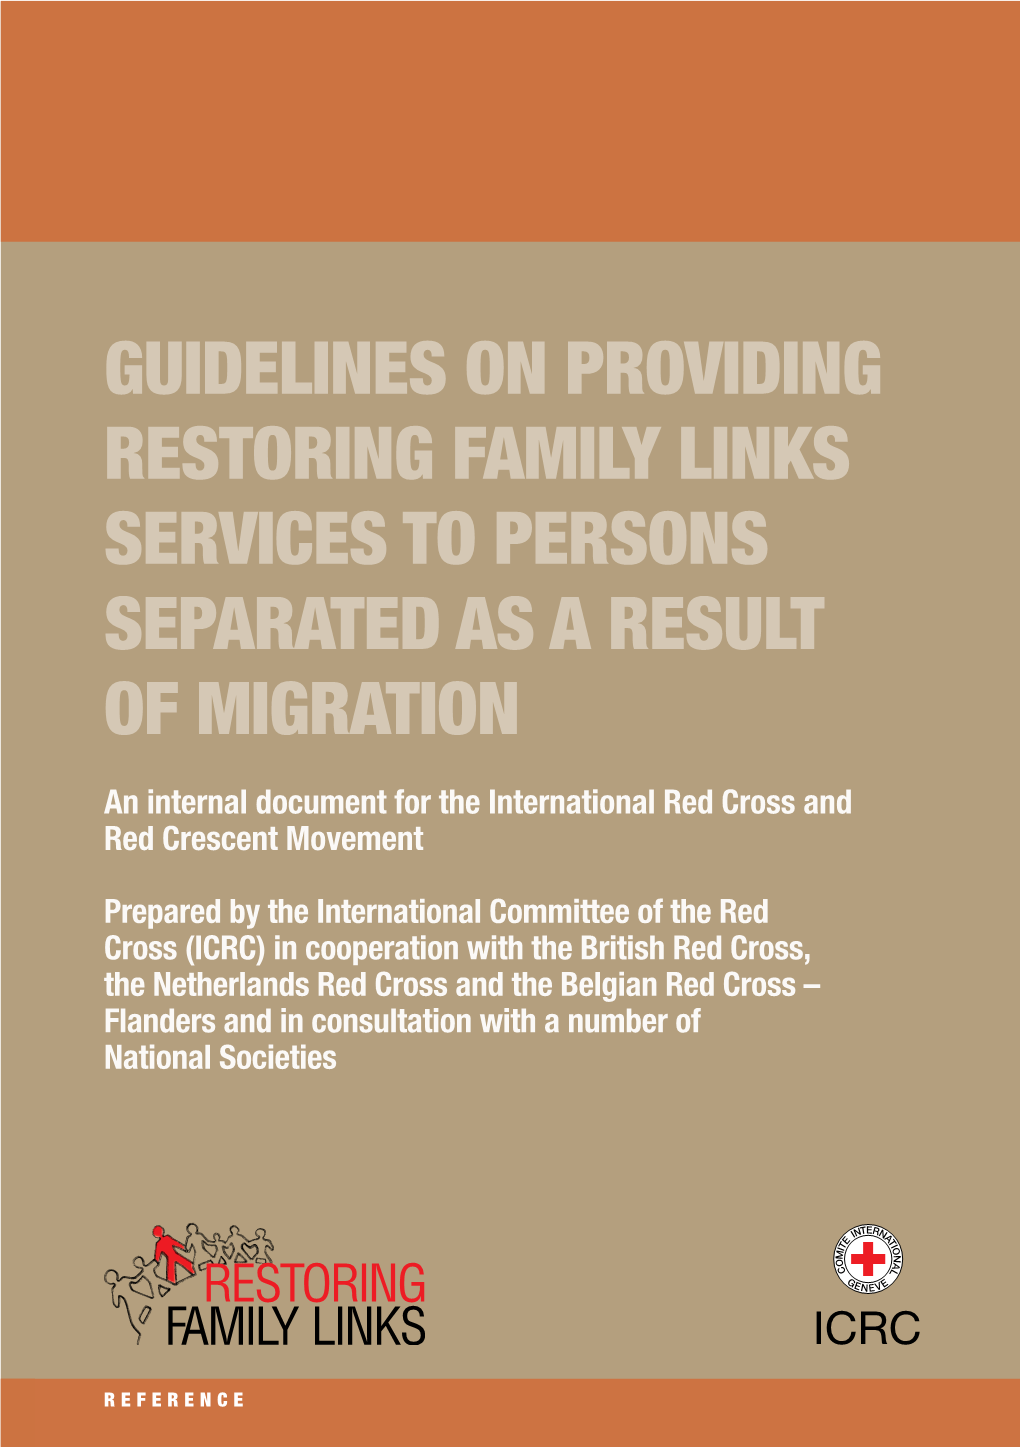 Guidelines on Providing Restoring Family Links Services to Persons Separated As a Result of Migration